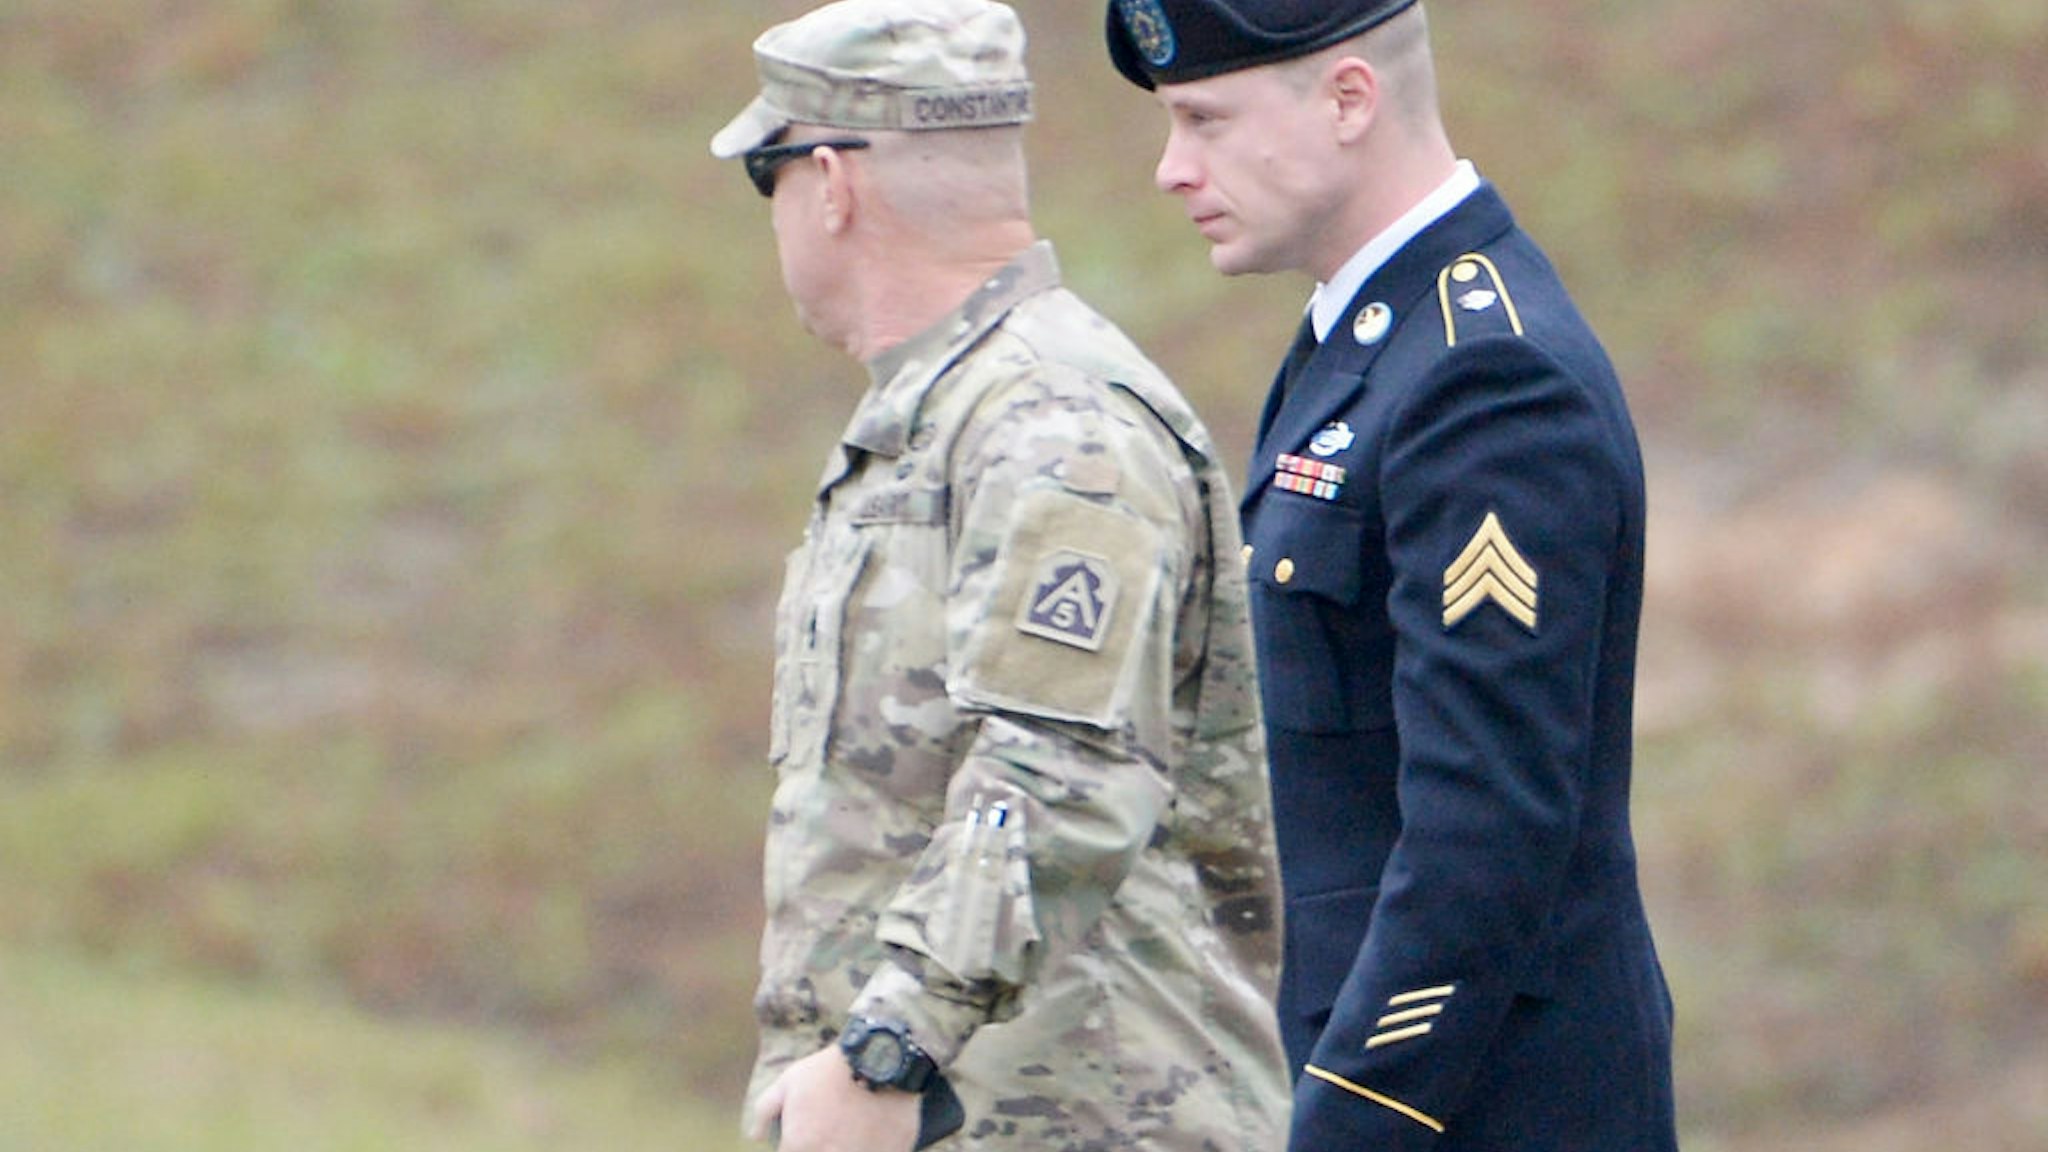 FORT BRAGG, NC - OCTOBER 23: U.S. Army Sgt. Robert Bowdrie 'Bowe Bergdahl' (R), 31 of Hailey, Idaho, is escorted into the Ft. Bragg military courthouse for his sentencing hearing on October 23, 2017 in Fort Bragg, North Carolina. Bergdahl pled guilty to desertion and misbehavior of in front of the enemy stemming from his decision to leave his outpost in 2009, which landed him five years in Taliban captivity. (Photo by Sara D. Davis/Getty Images)